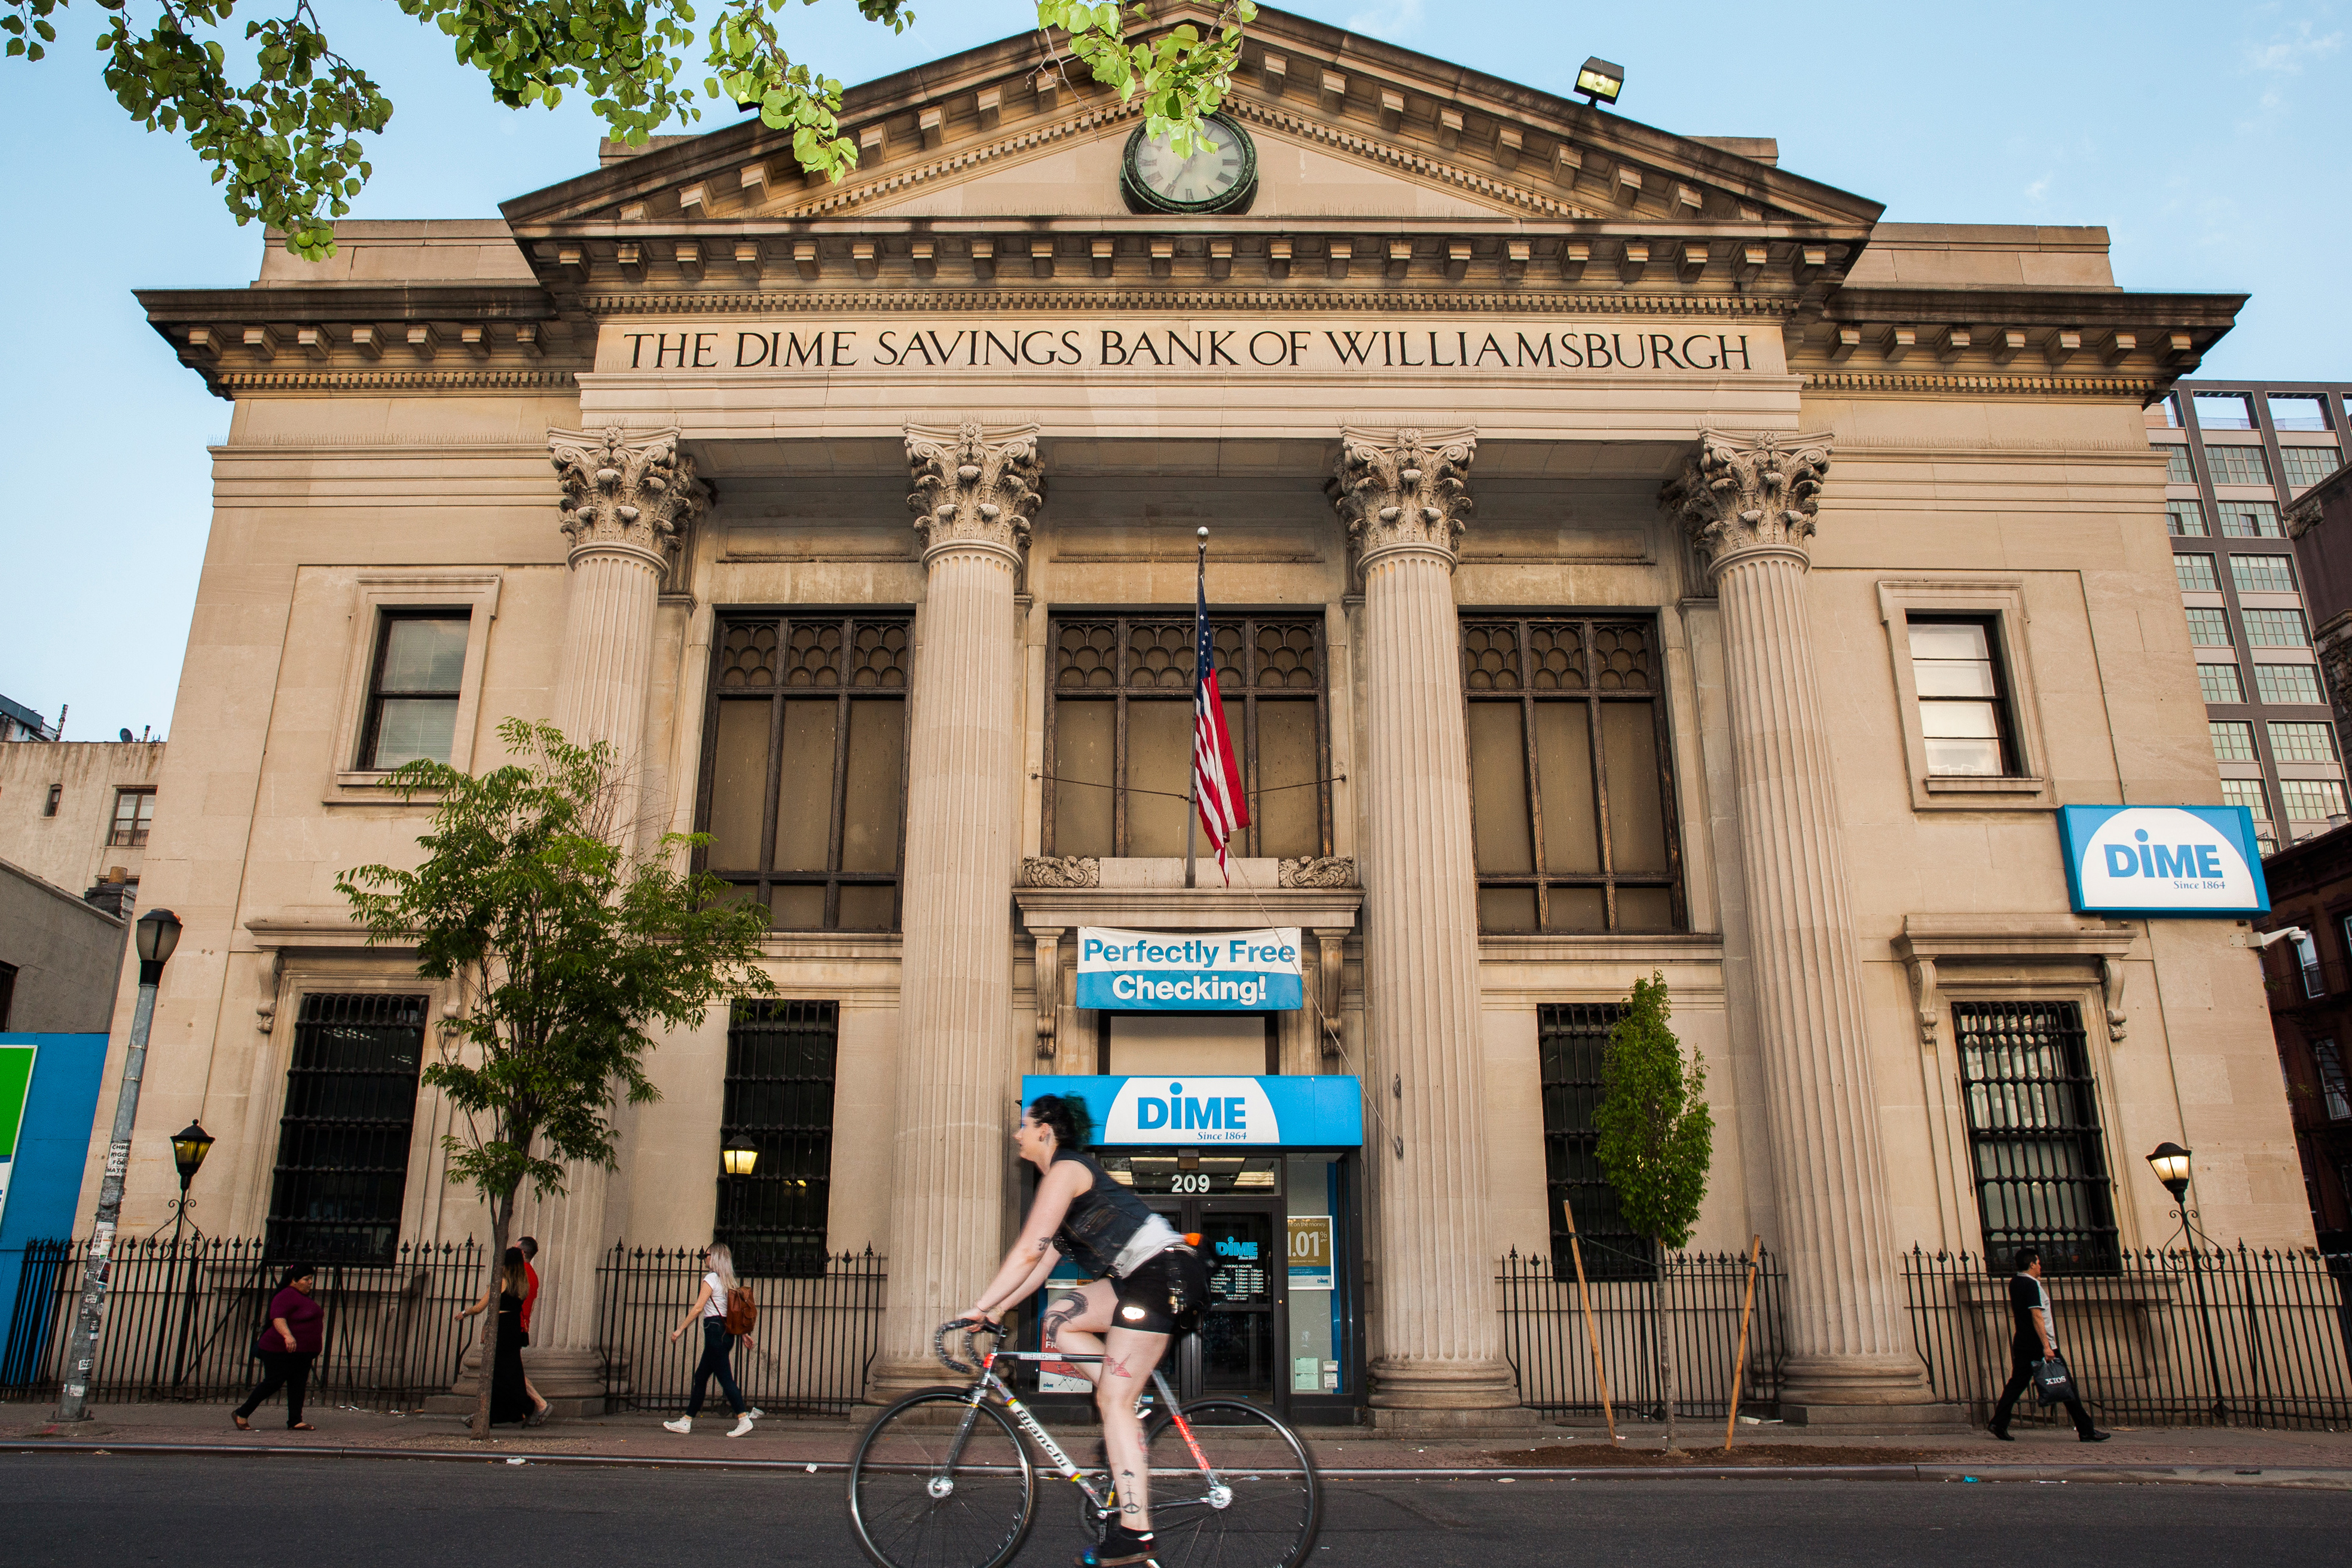 A bicyclist pedals past a stone-fronted bank building, framed by large columns.